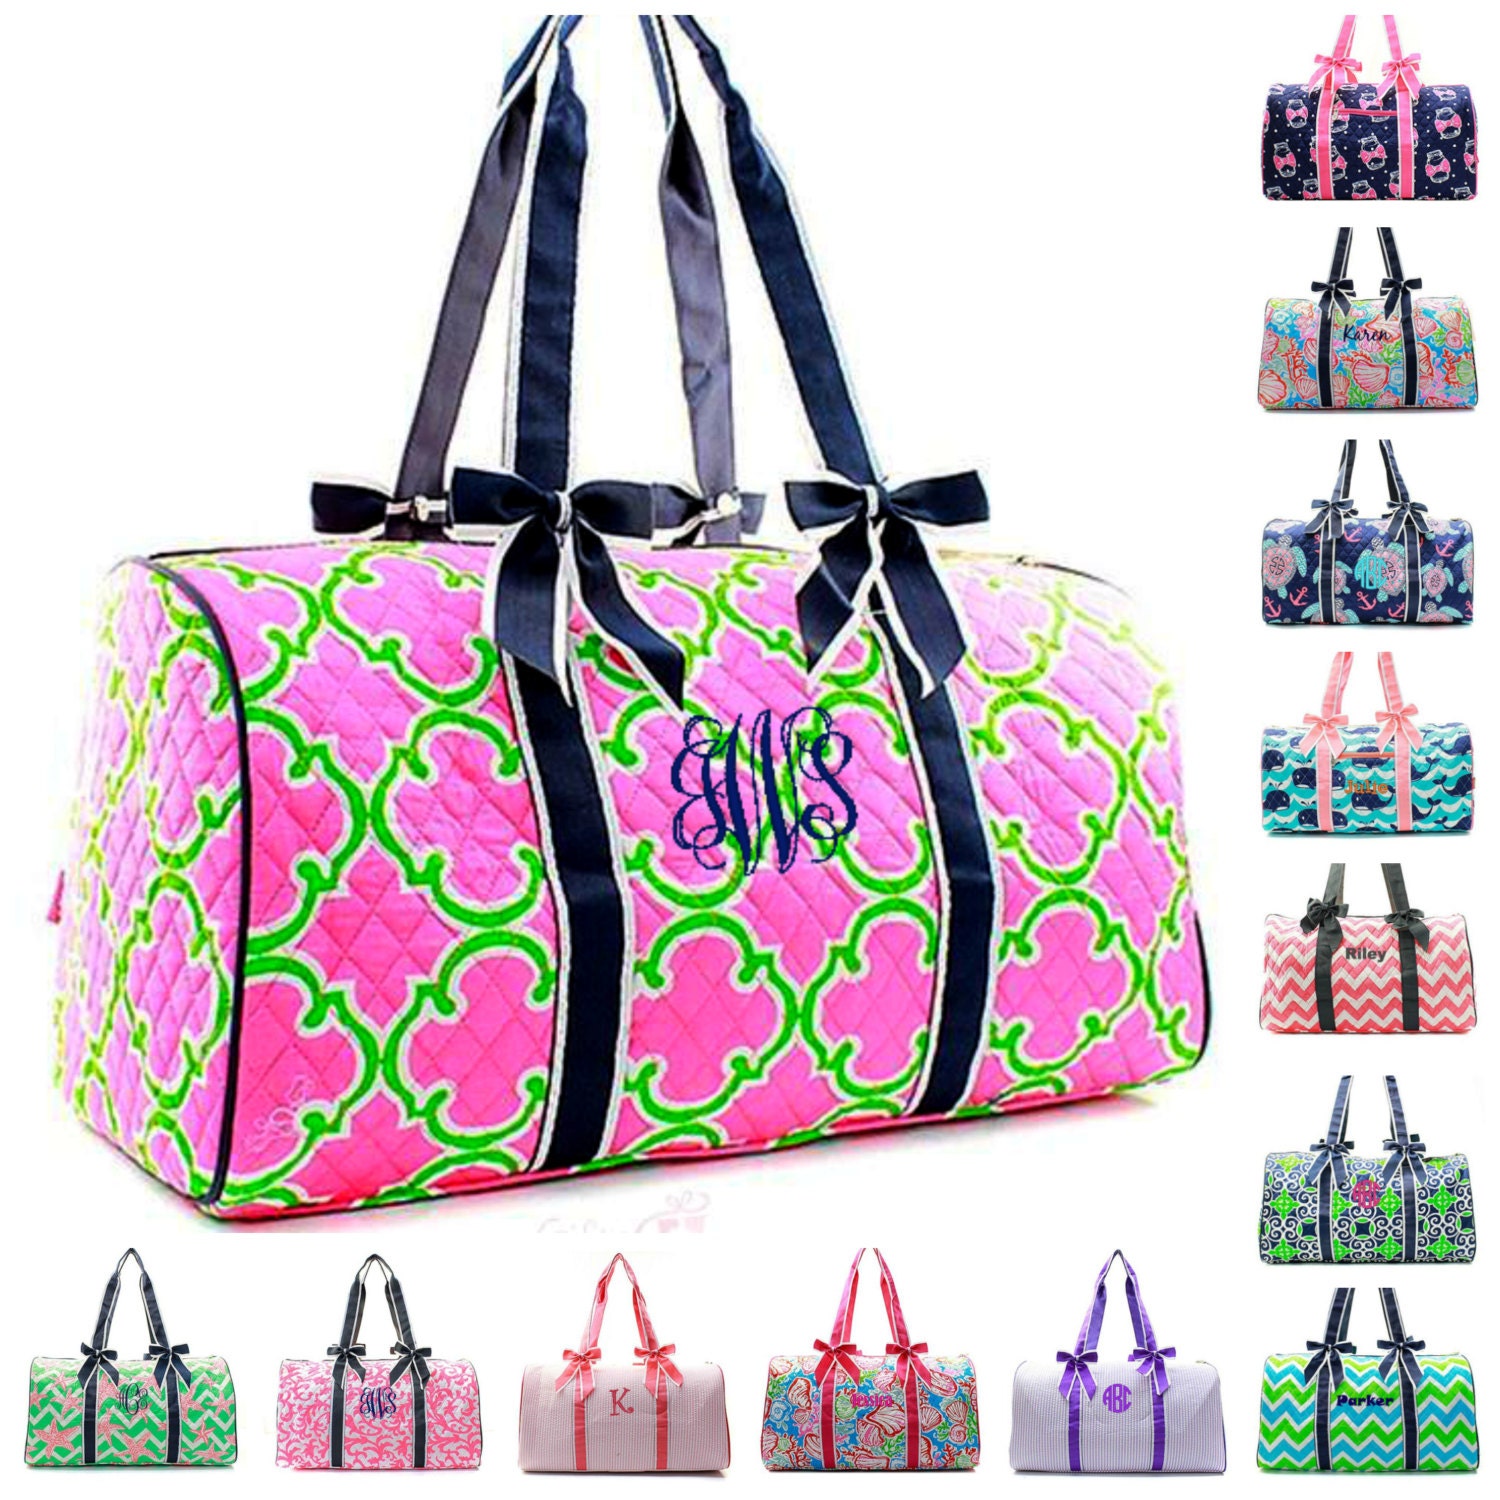 Monogrammed Quilted Duffle Bag Large Kids Dance Cheer Girls